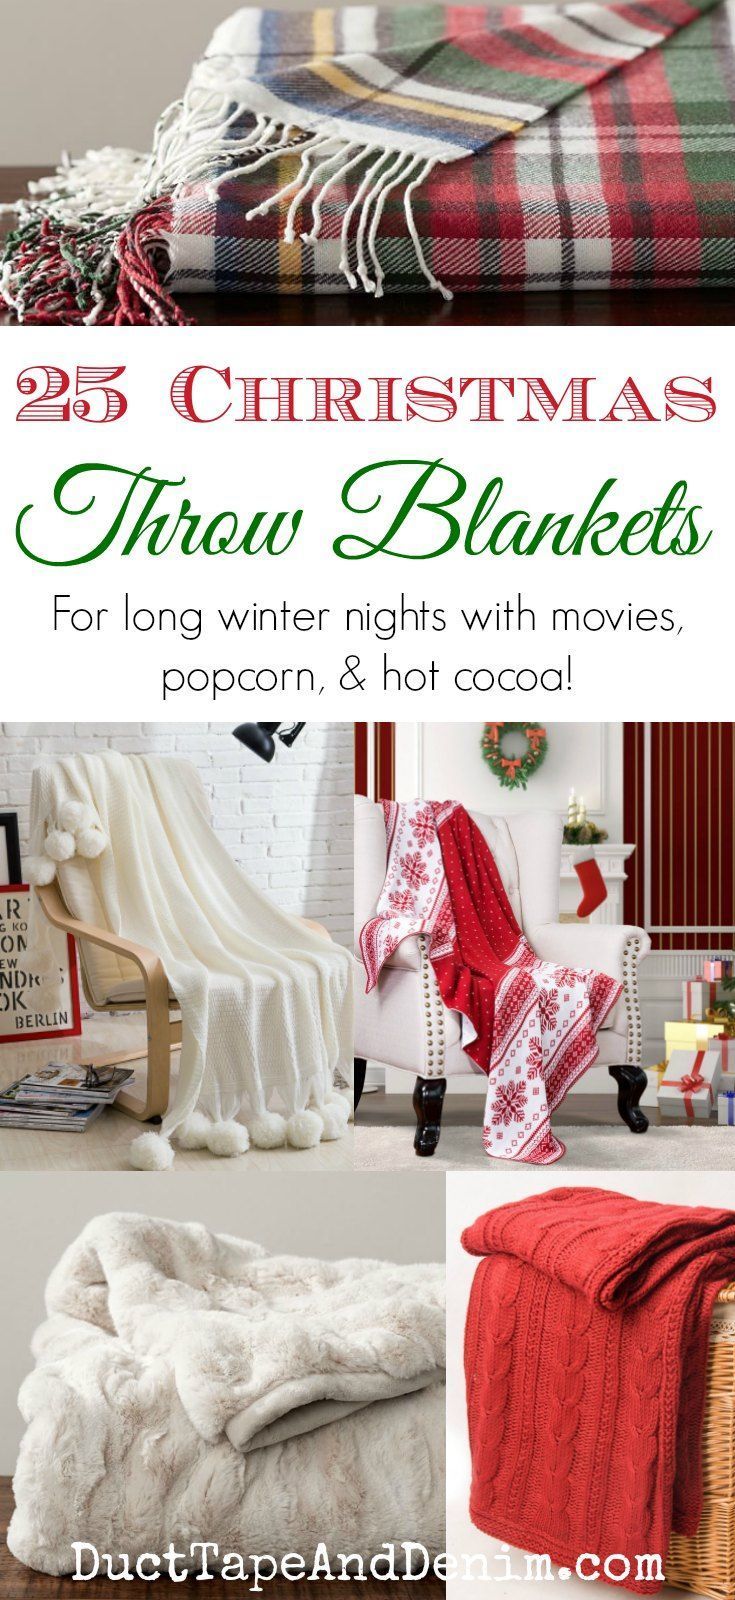 25 Cozy Christmas Blankets for Curling Up on the Couch - 25 Cozy Christmas Blankets for Curling Up on the Couch -   19 diy Christmas room decor ideas